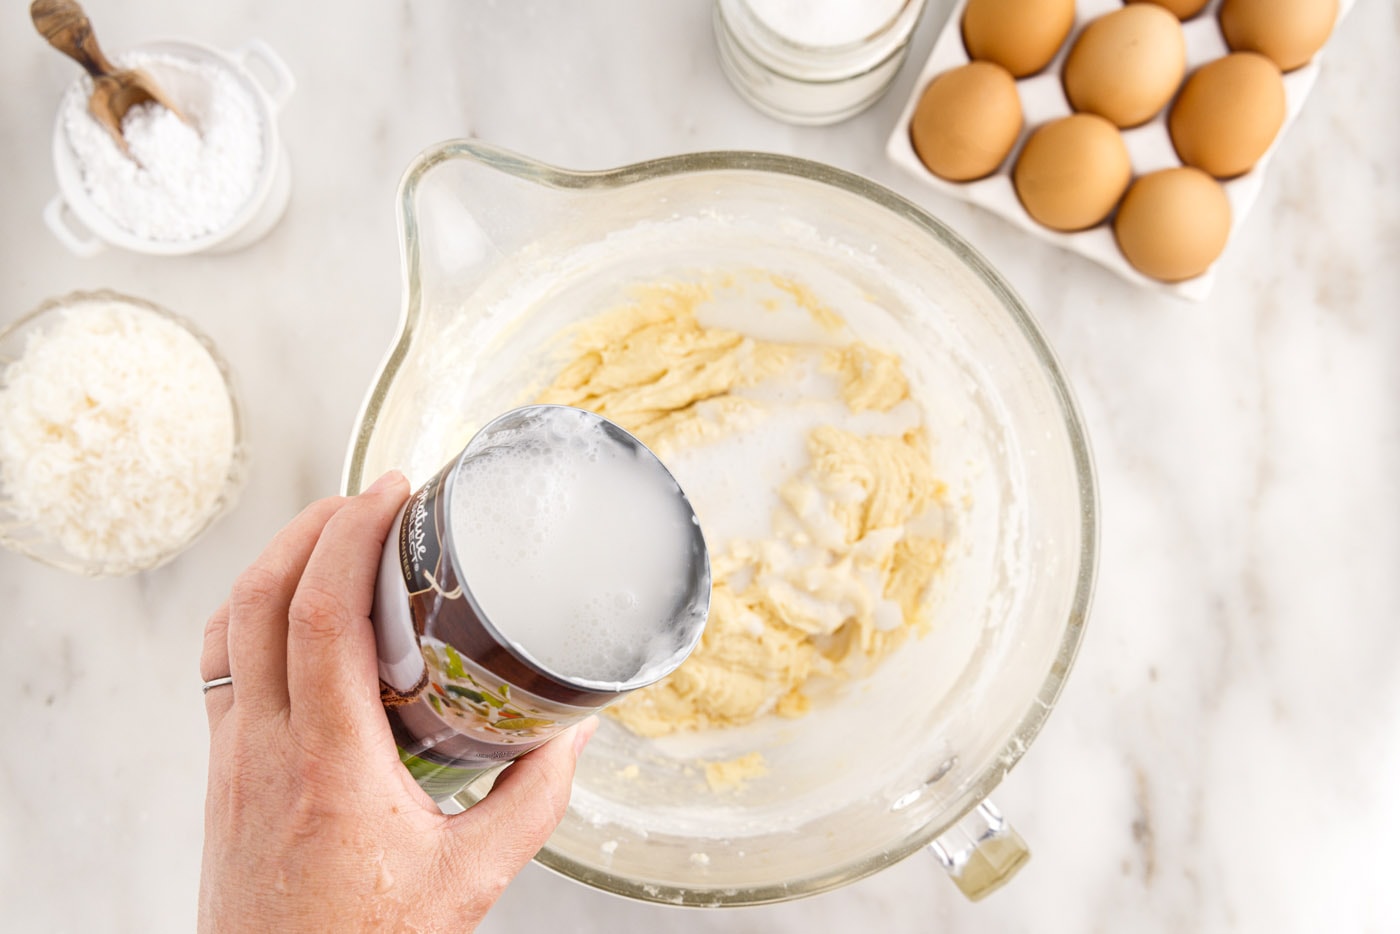 pouring coconut milk into cake batter